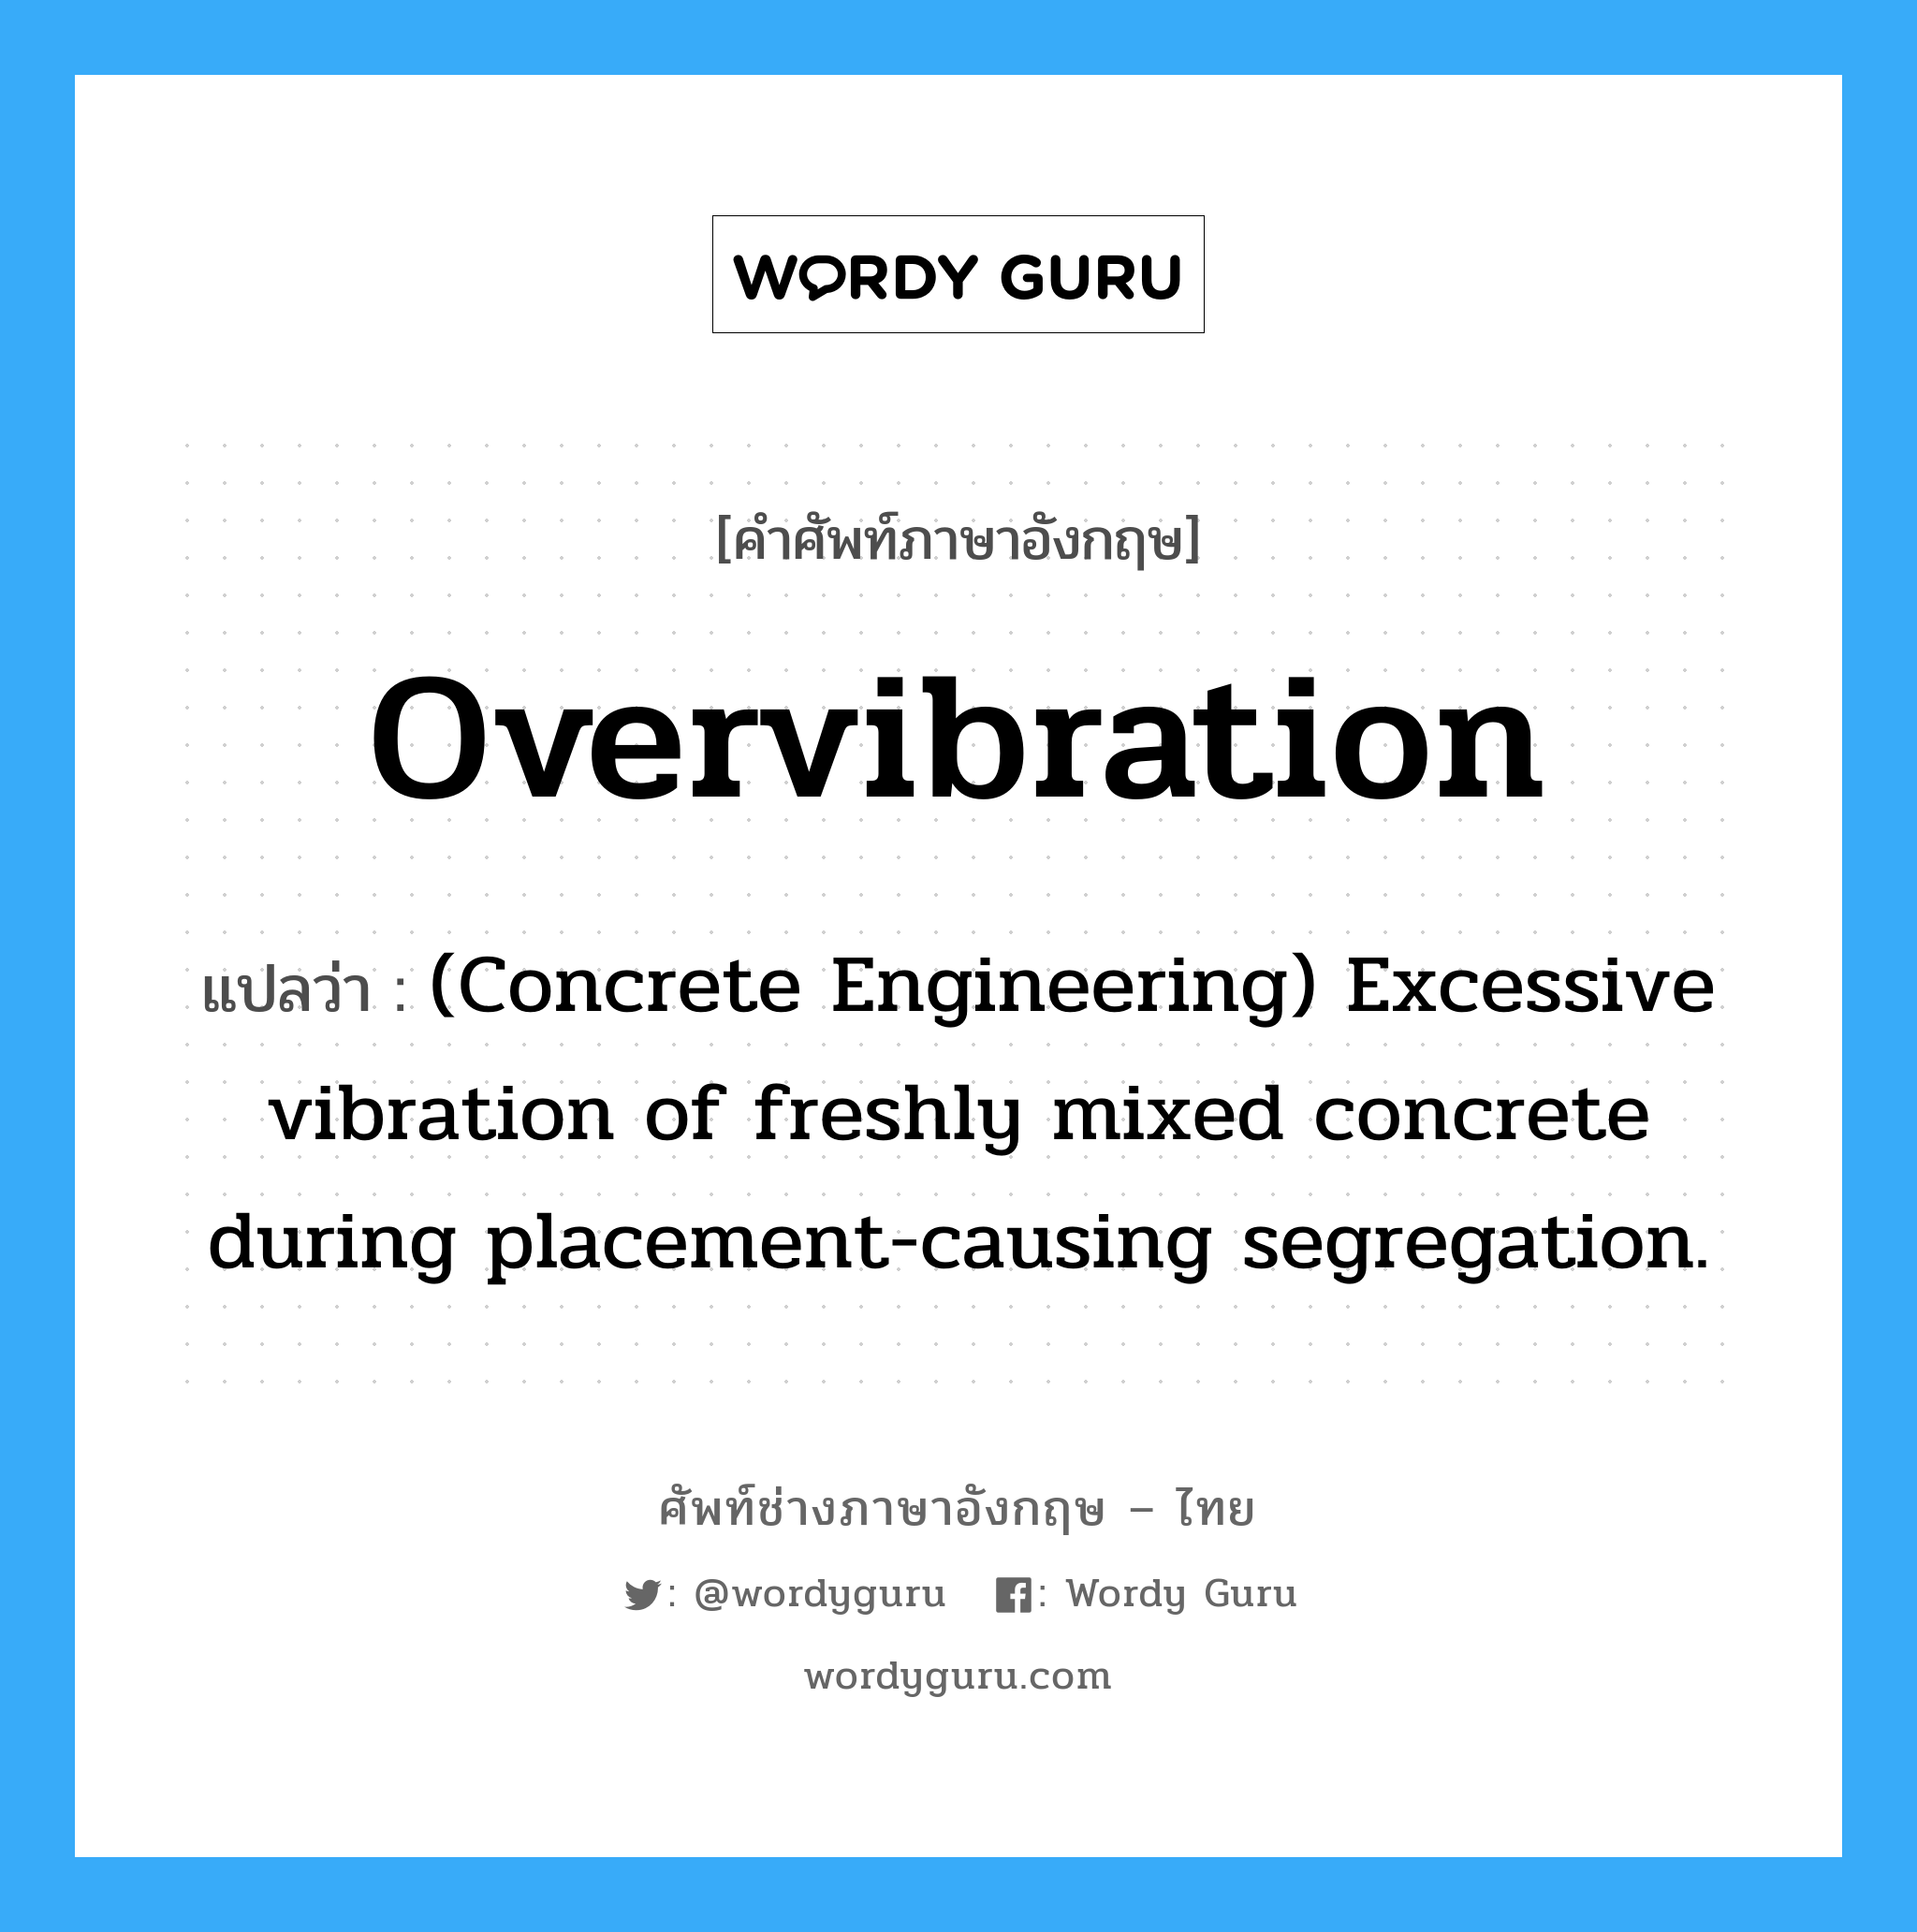 (Concrete Engineering) Excessive vibration of freshly mixed concrete during placement-causing segregation. ภาษาอังกฤษ?, คำศัพท์ช่างภาษาอังกฤษ - ไทย (Concrete Engineering) Excessive vibration of freshly mixed concrete during placement-causing segregation. คำศัพท์ภาษาอังกฤษ (Concrete Engineering) Excessive vibration of freshly mixed concrete during placement-causing segregation. แปลว่า Overvibration